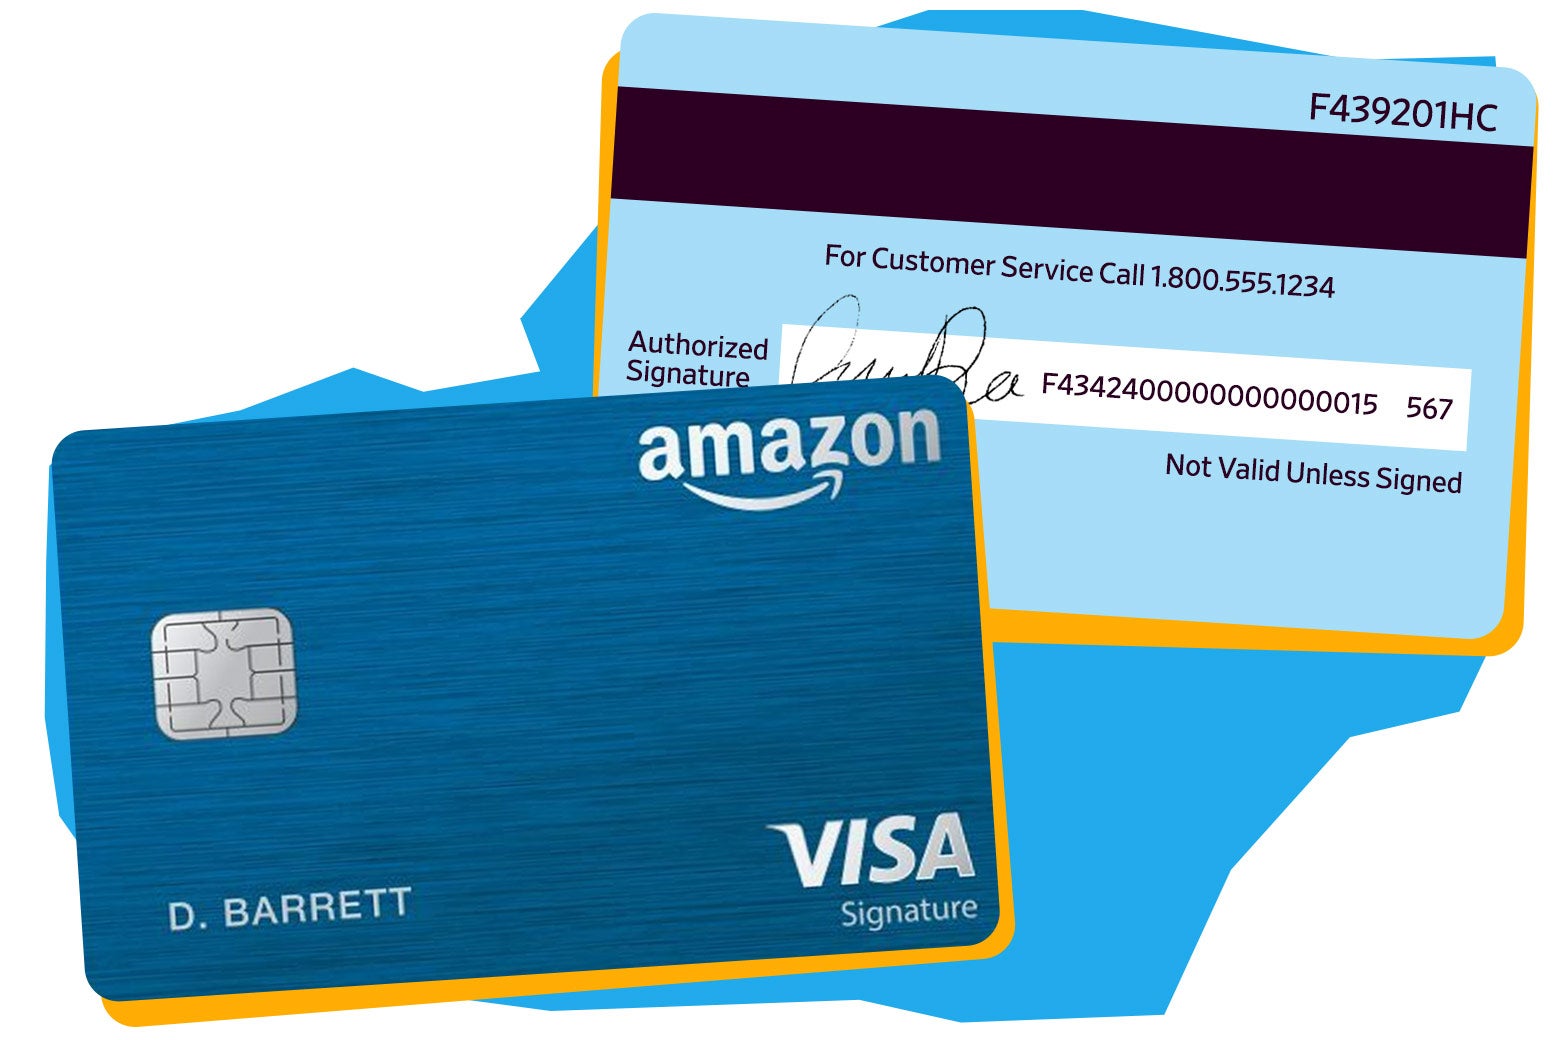 Amazon credit cards with numbers on back.